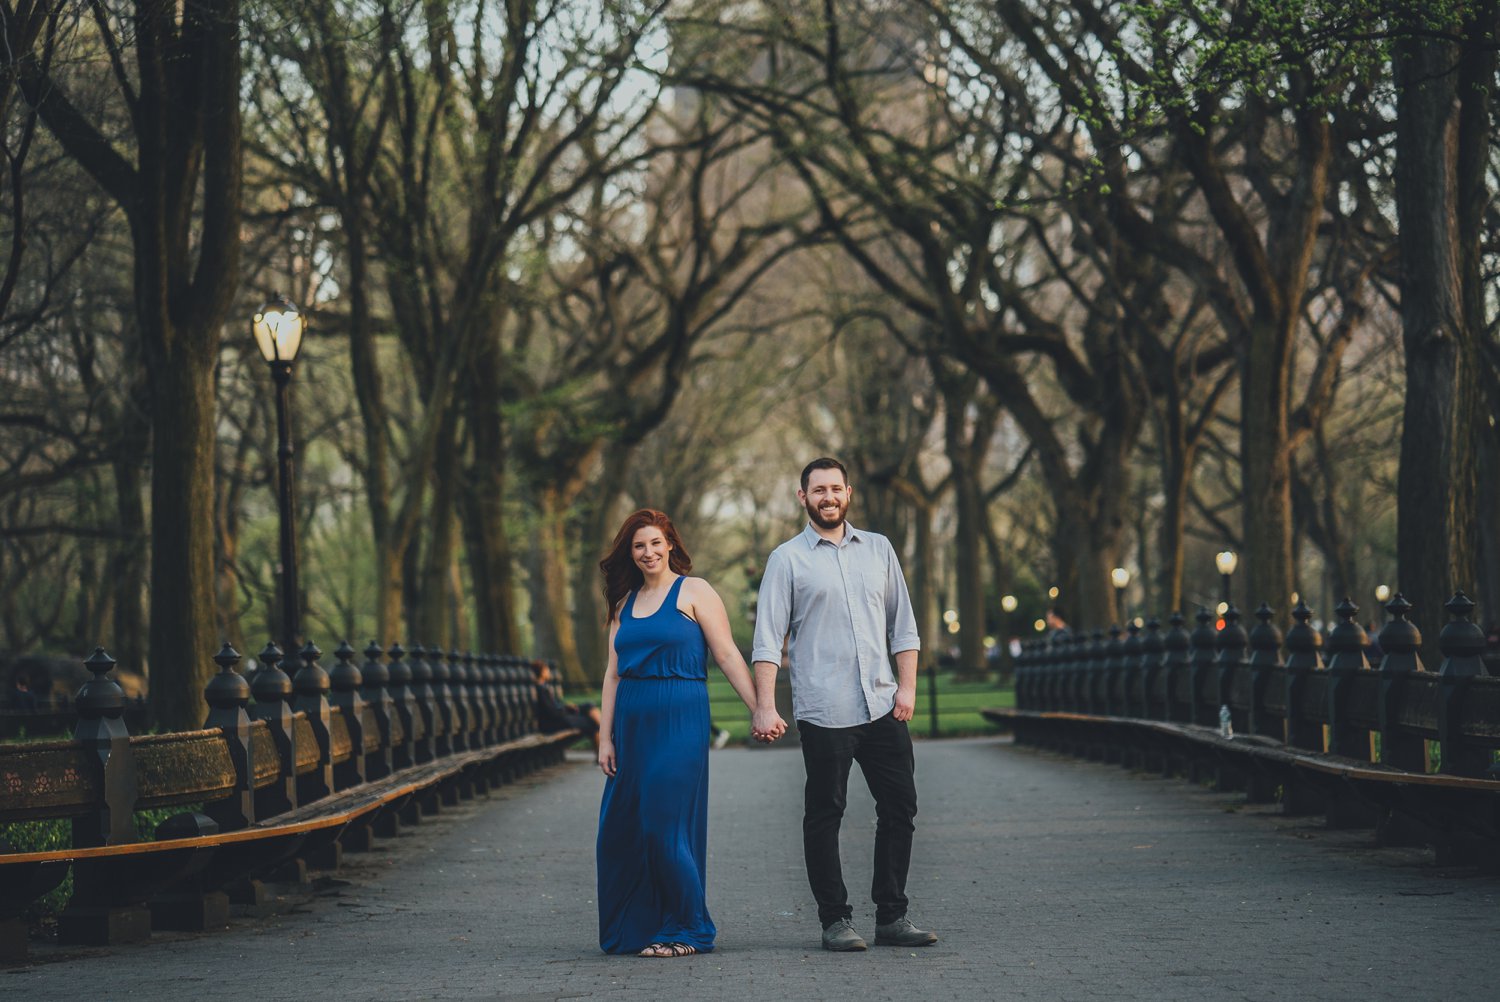 56NYC-NJ-ENGAGEMENT-PHOTOGRAPHY-BY-INTOTHESTORY-MOO-JAE.JPG